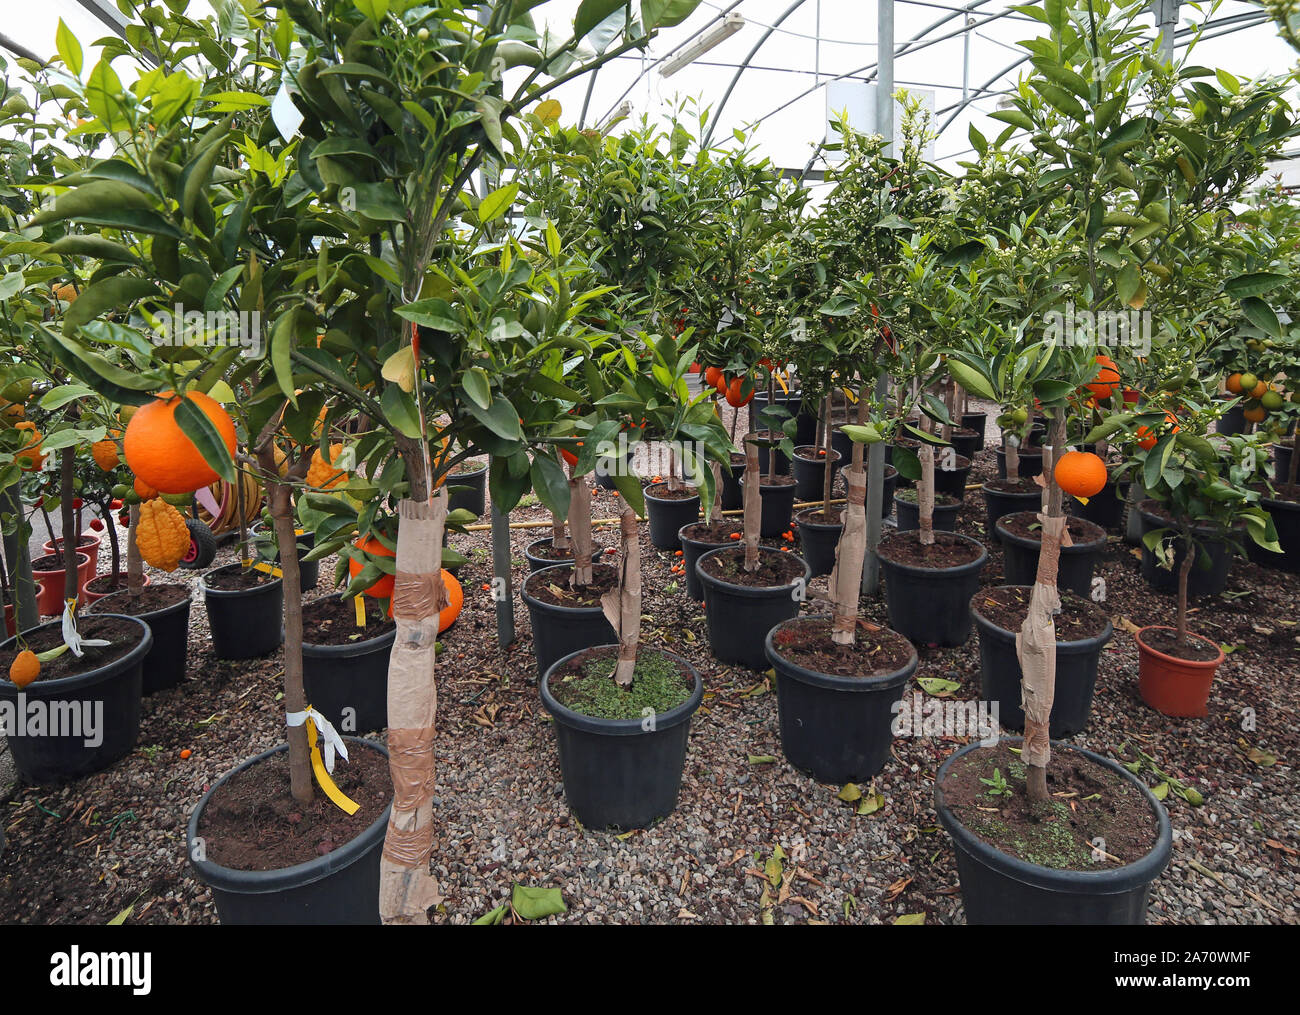 fruit trees with clementine and orange for sale Stock Photo